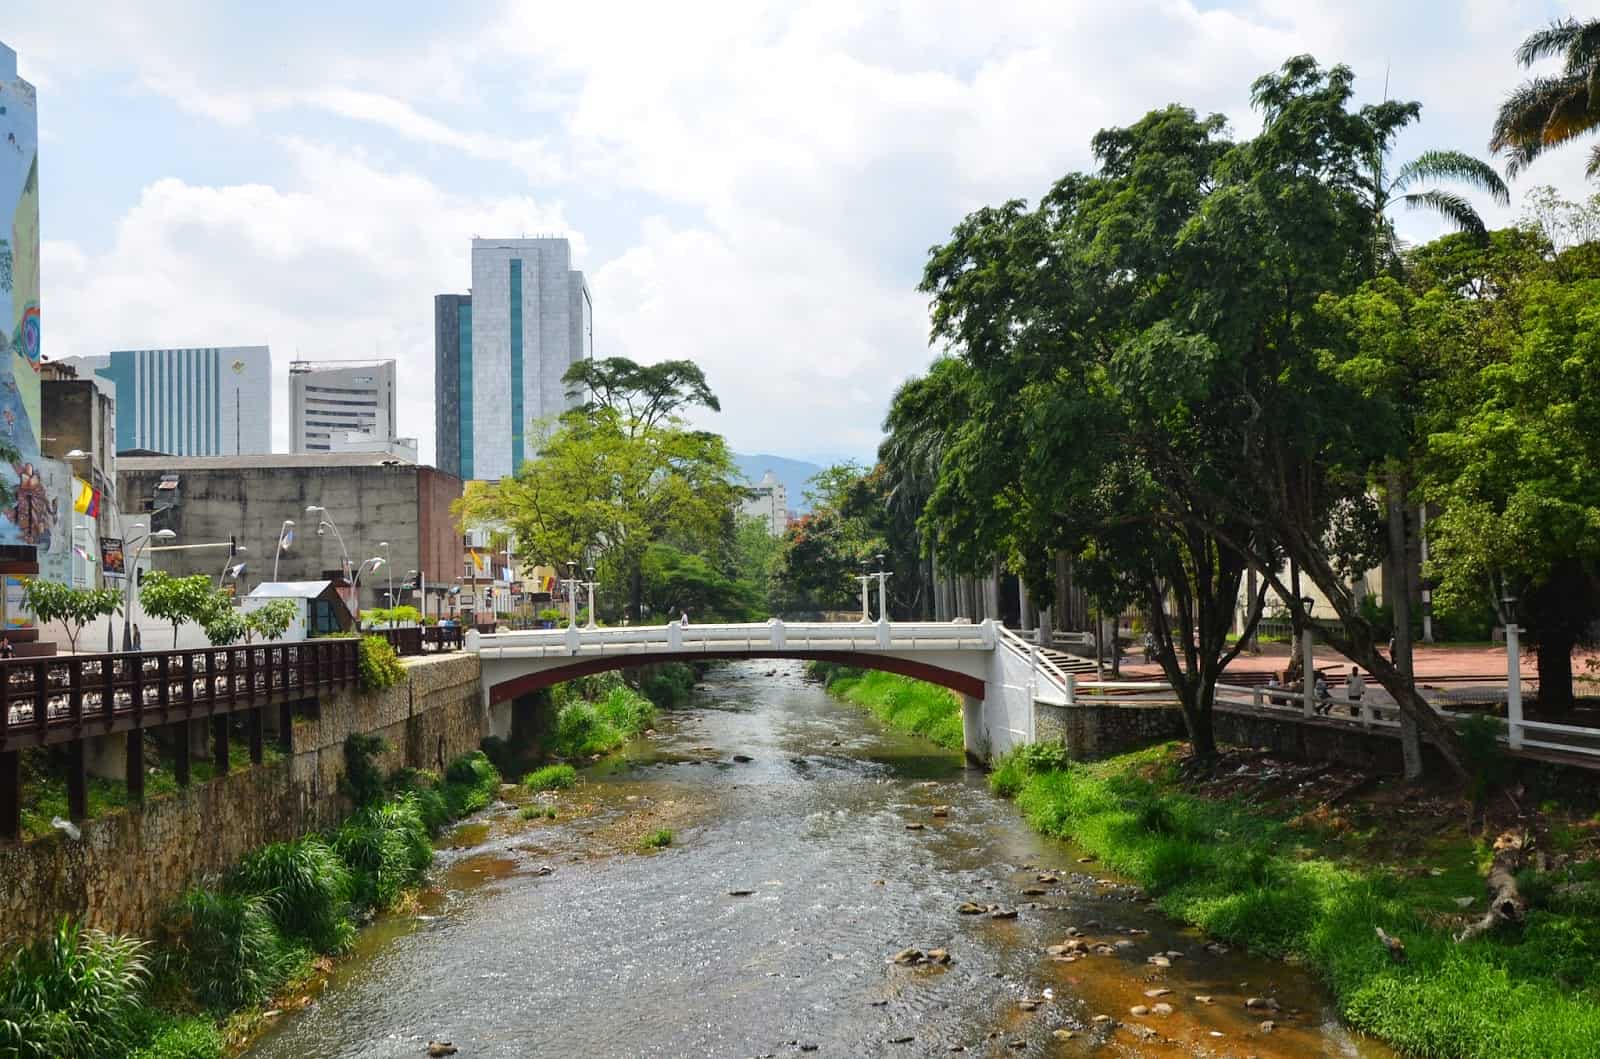 Río Cali in Cali, Colombia